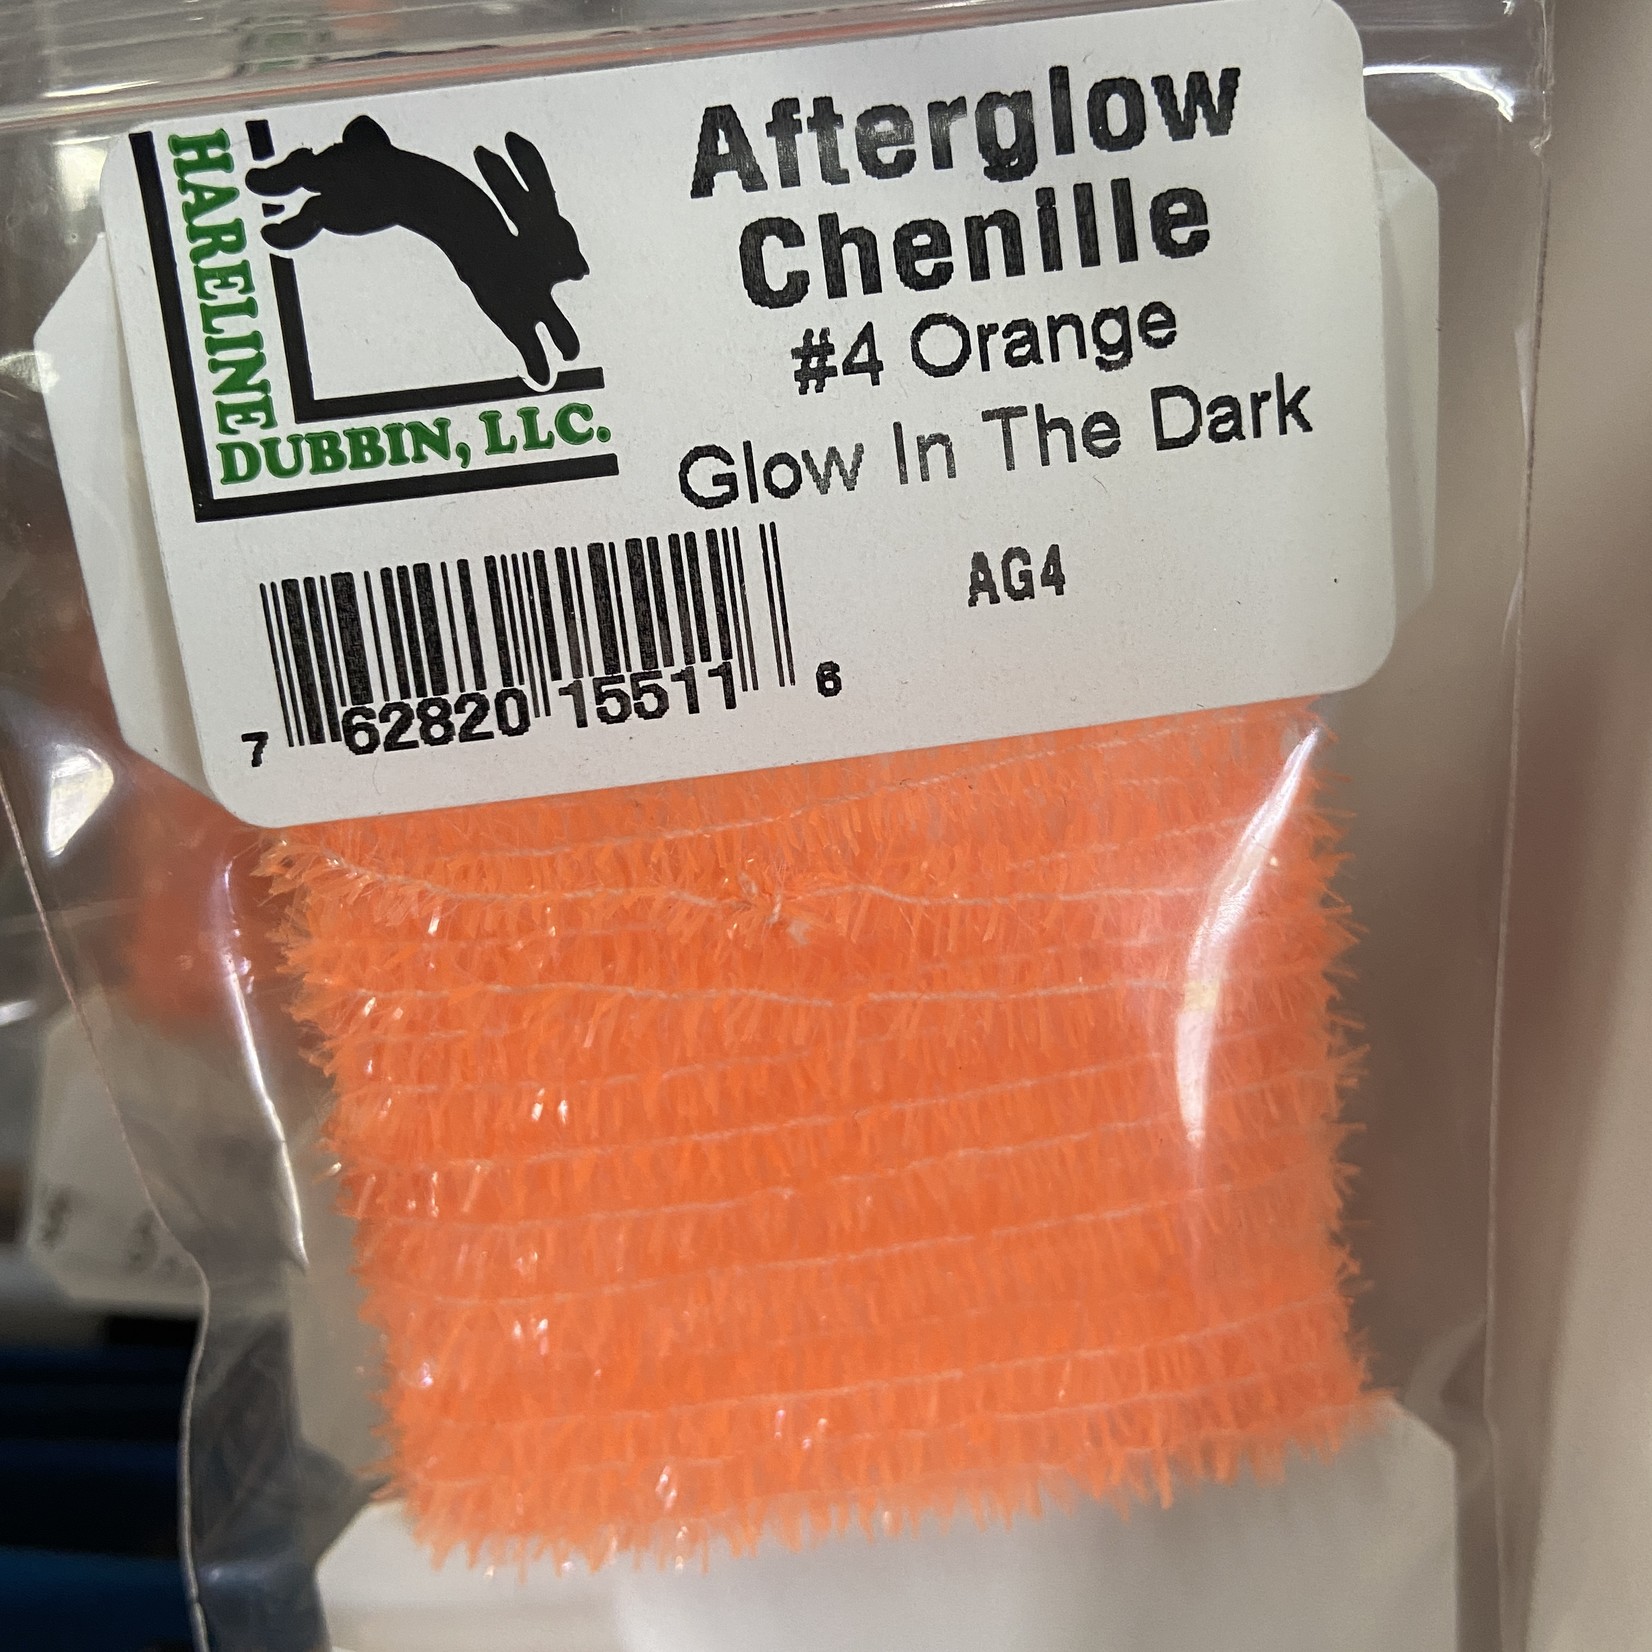 AfterGlo Chenille - Fly Tying Material